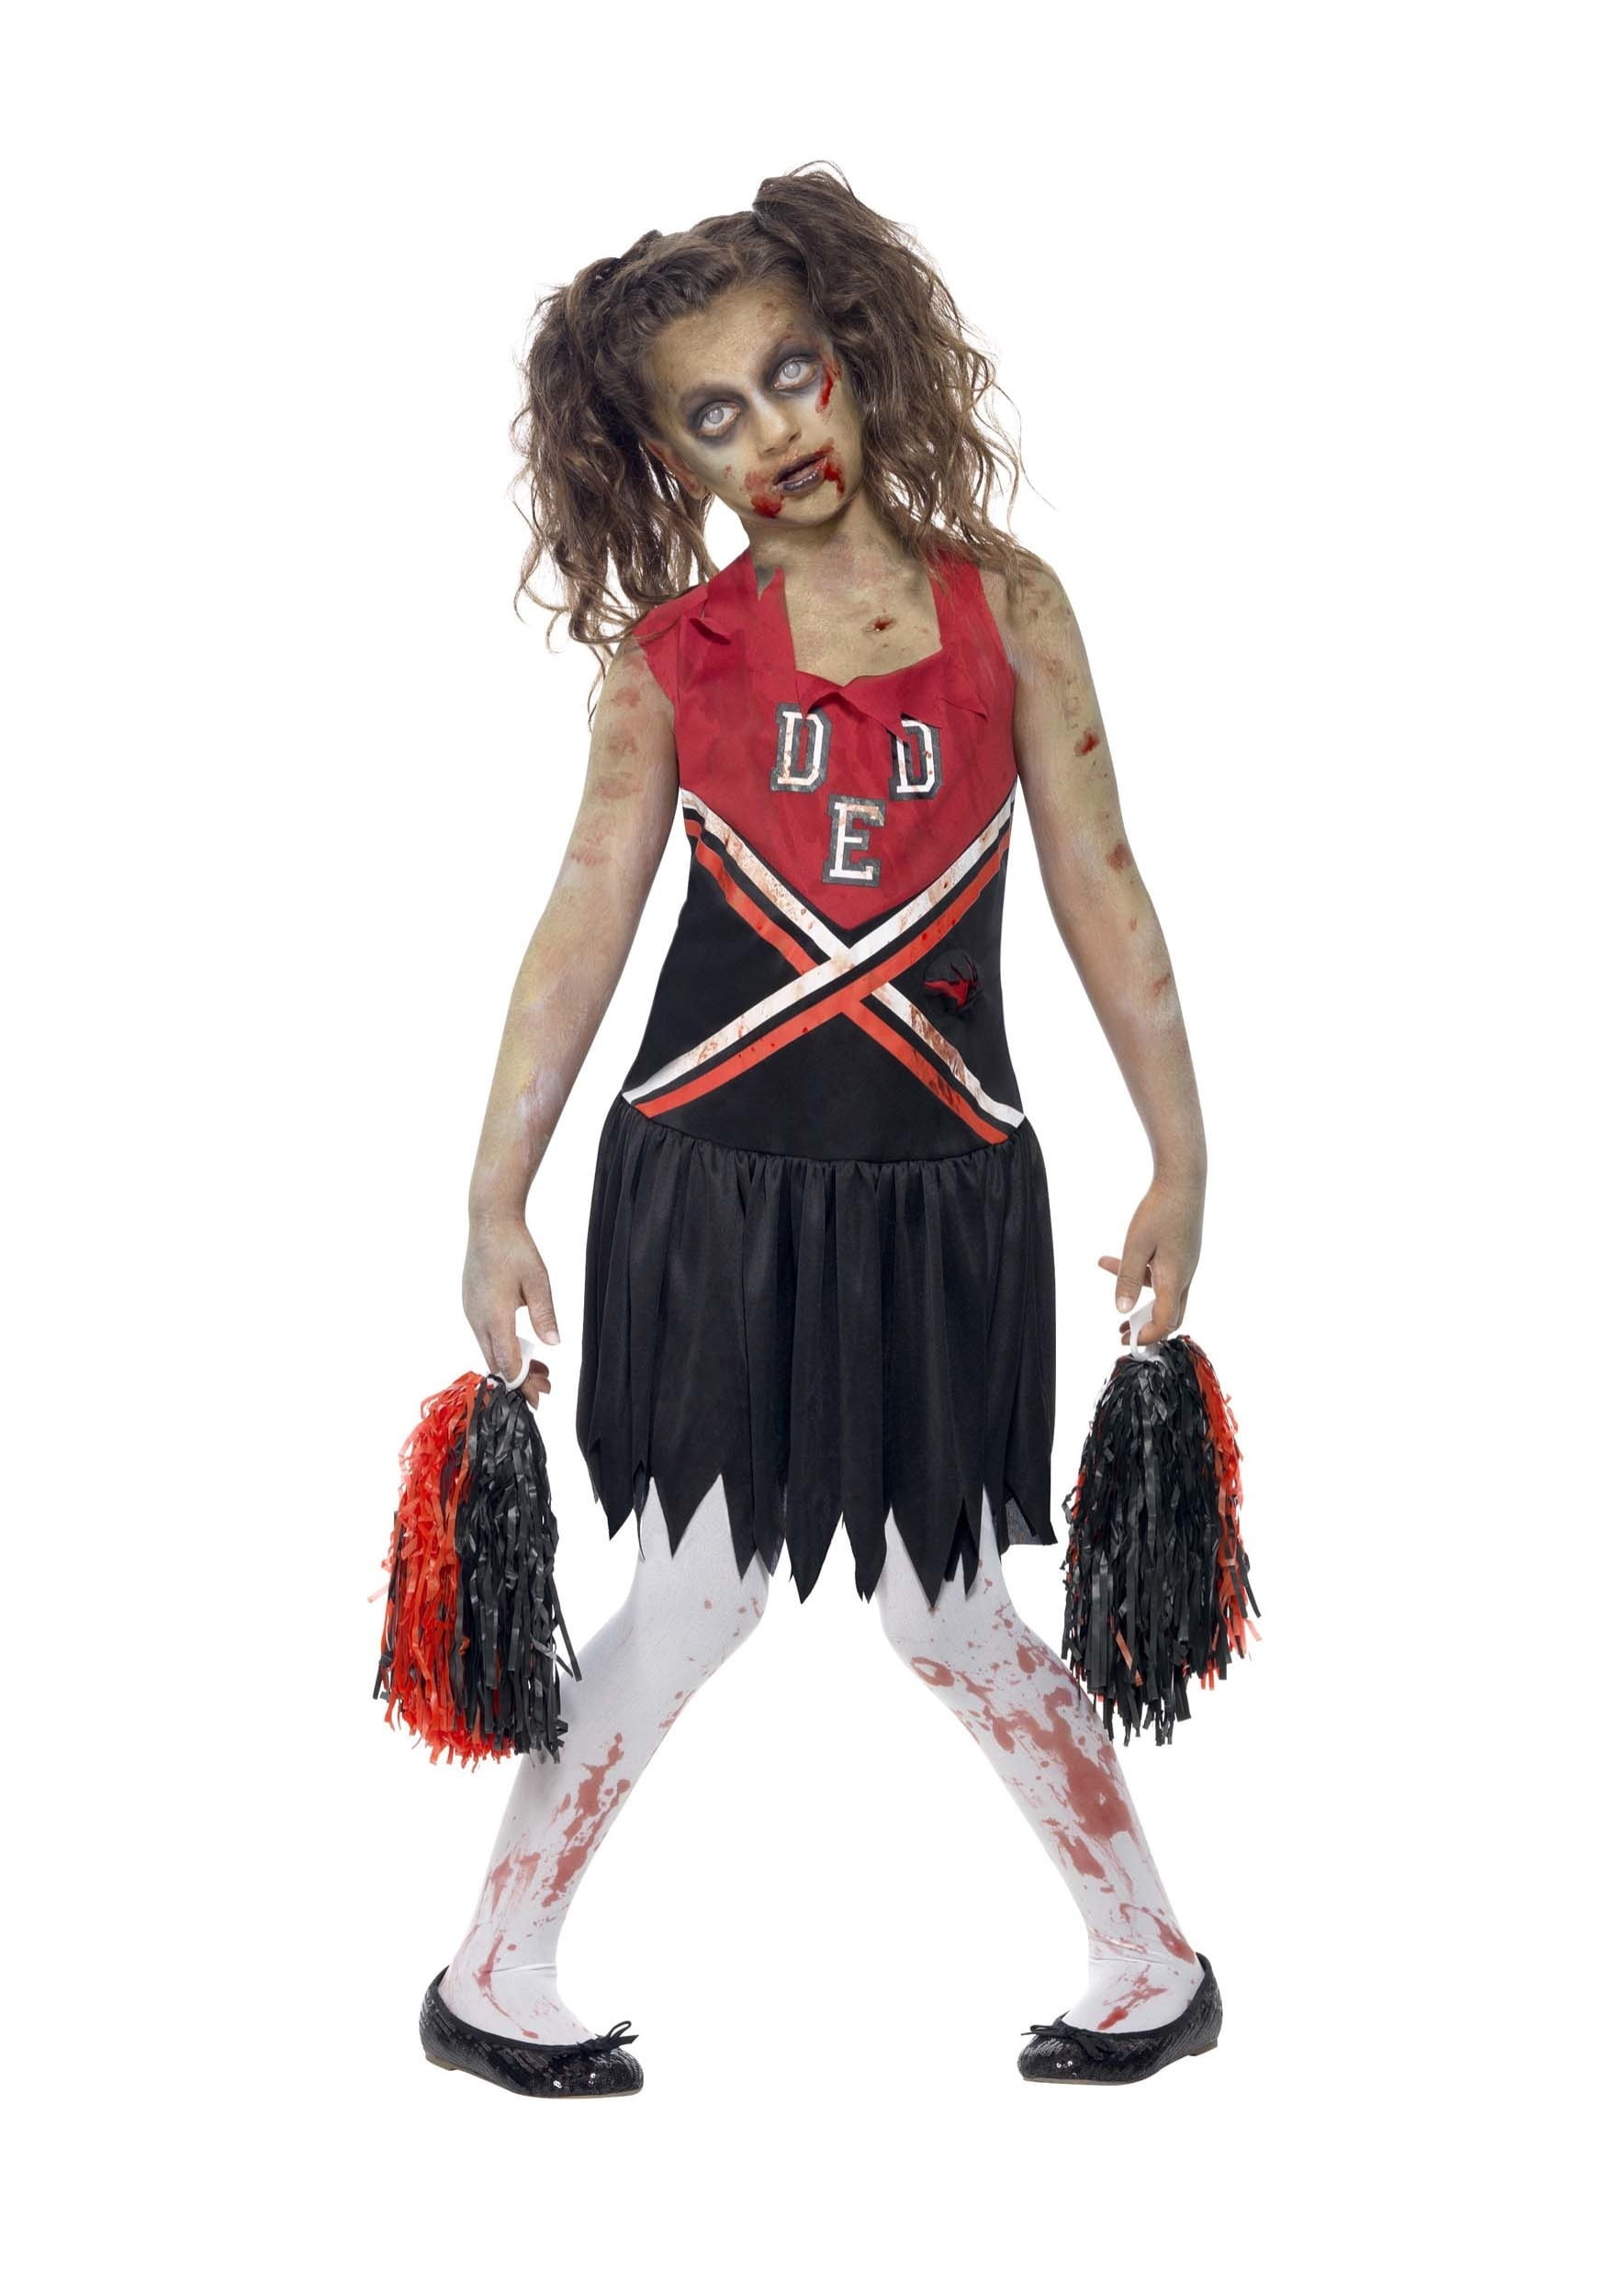 Details about   Adult Zombie Cheerleader Costume with Wig Size 12-14 